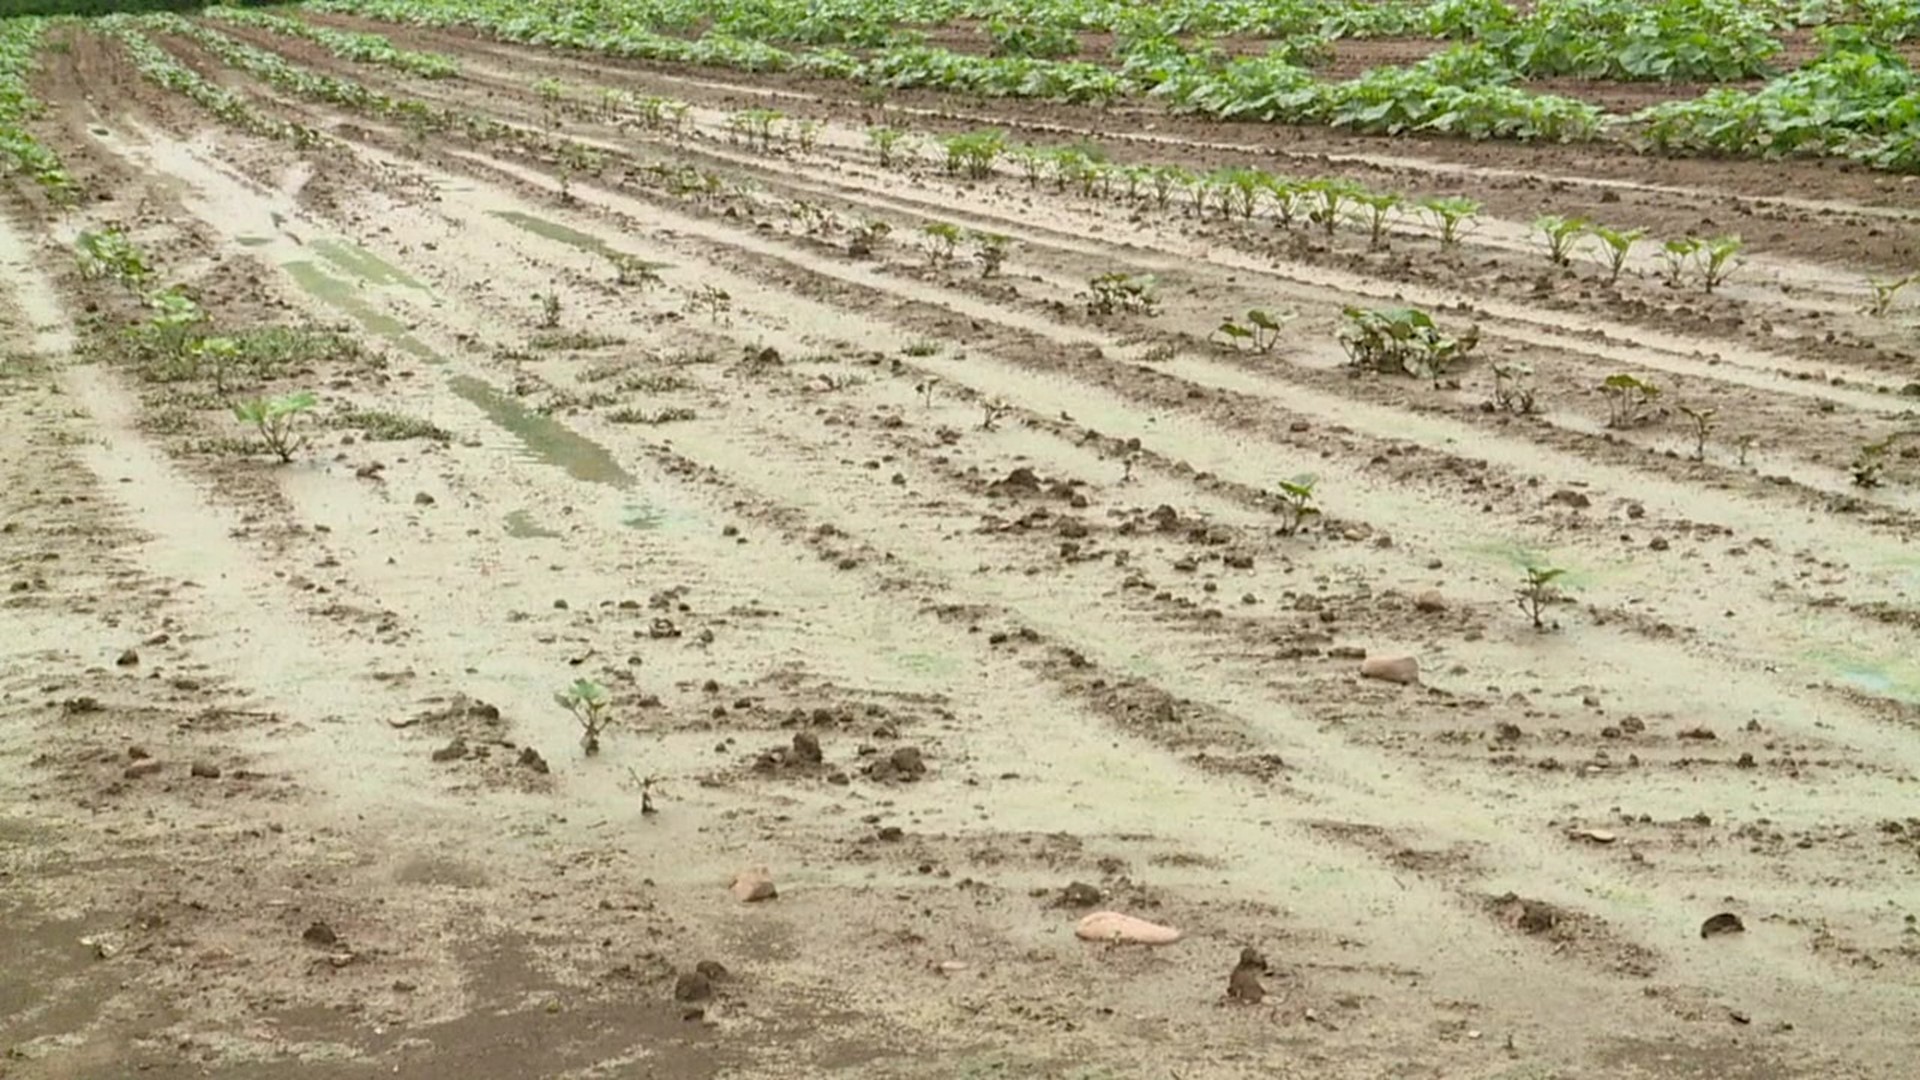 Farmers in Lycoming County say the recent weather has been great for the growing, but that constant rain and heat could have some negative side effects.